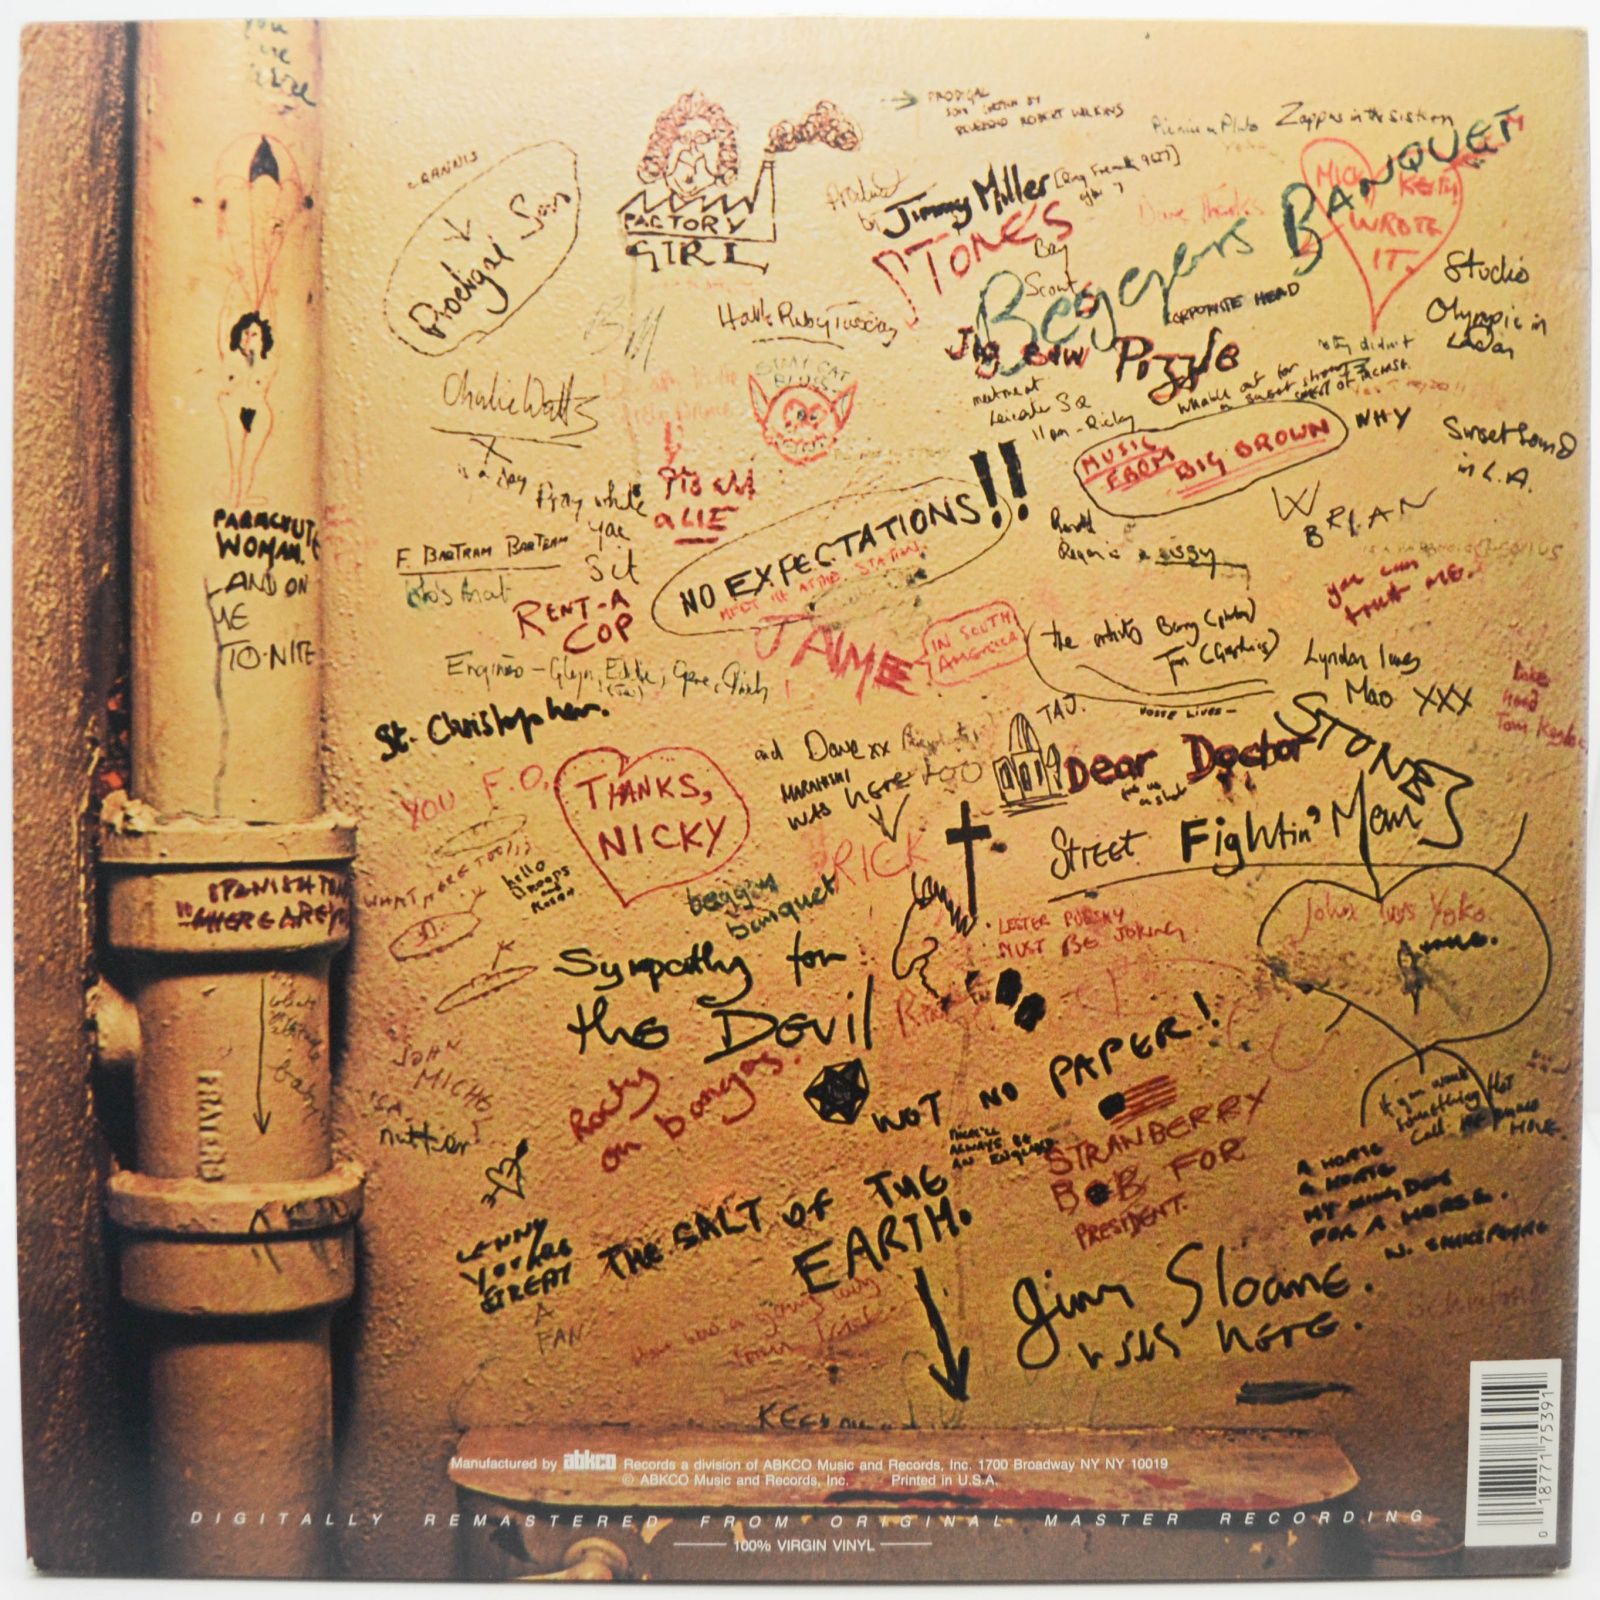 Rolling Stones — Beggars Banquet (USA), 1968